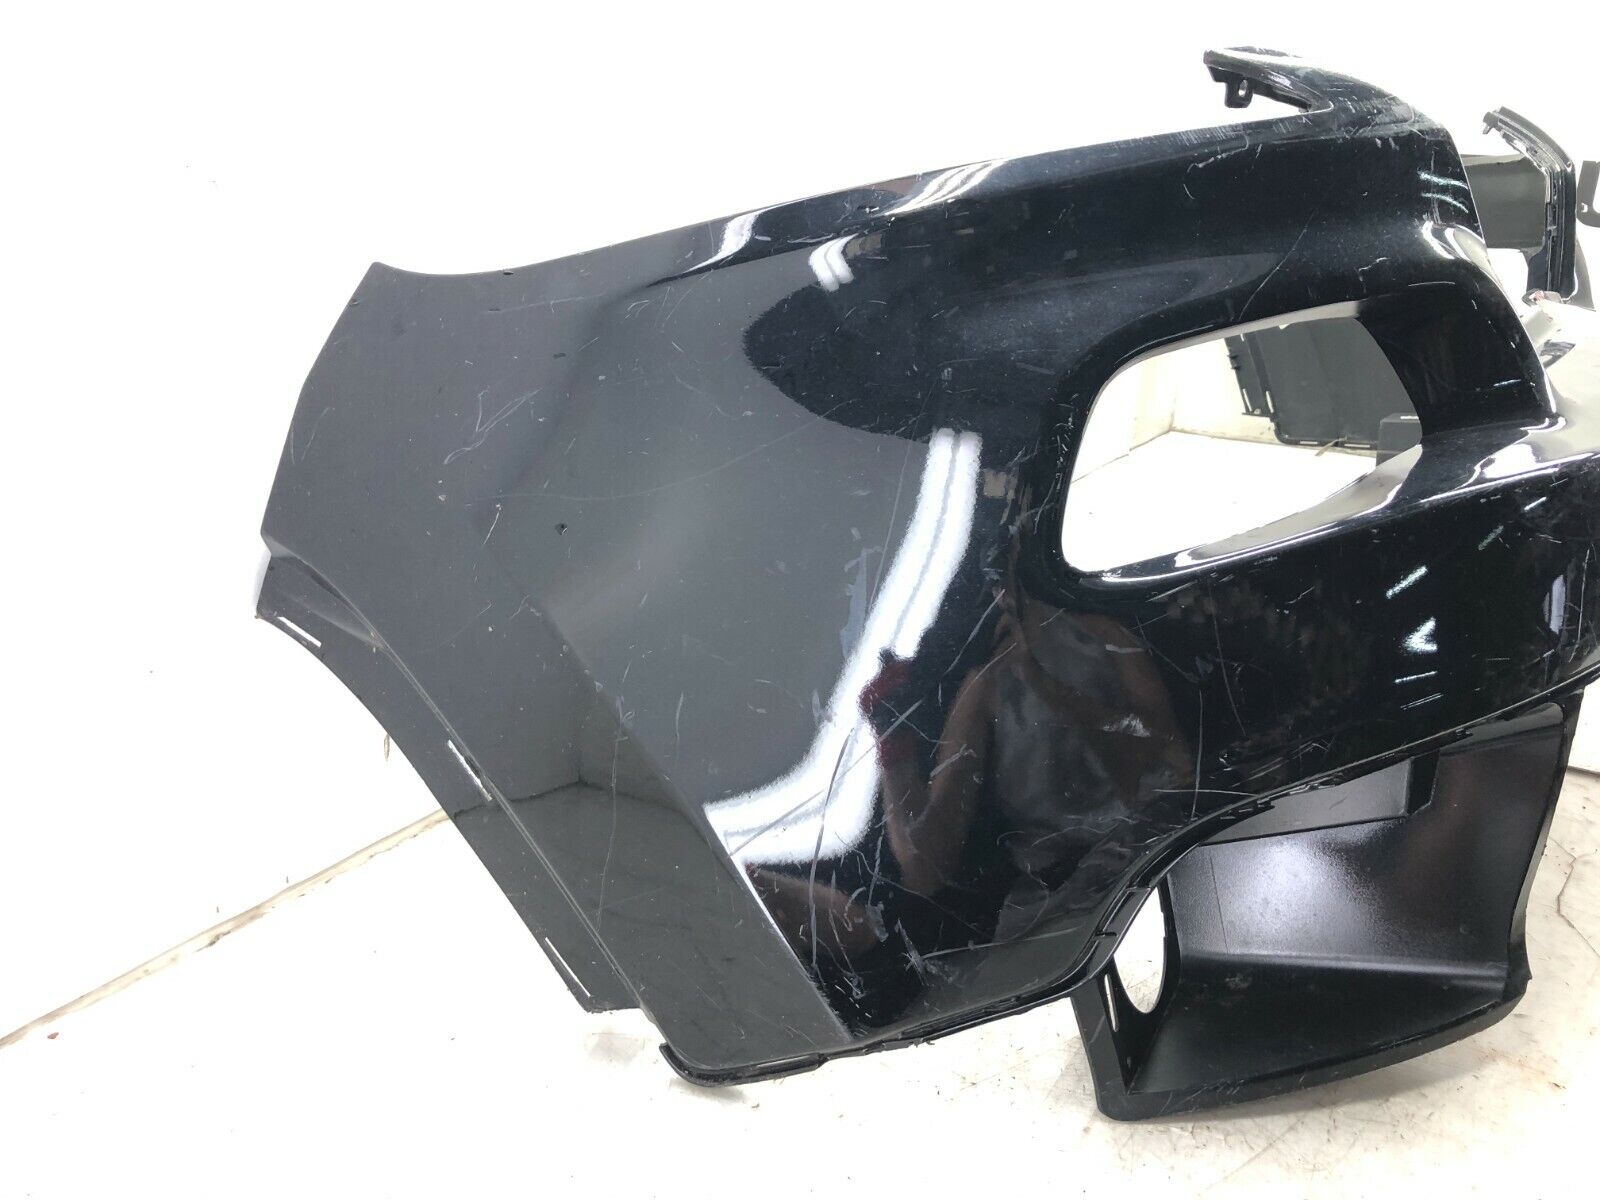 Used 2014-2018 Jeep Grand Cherokee Front Bumper Cover Oem for Sale | 5NJ52TRMAA 5NJ55TRMAA 2018 Jeep Grand Cherokee Front Bumper Parts